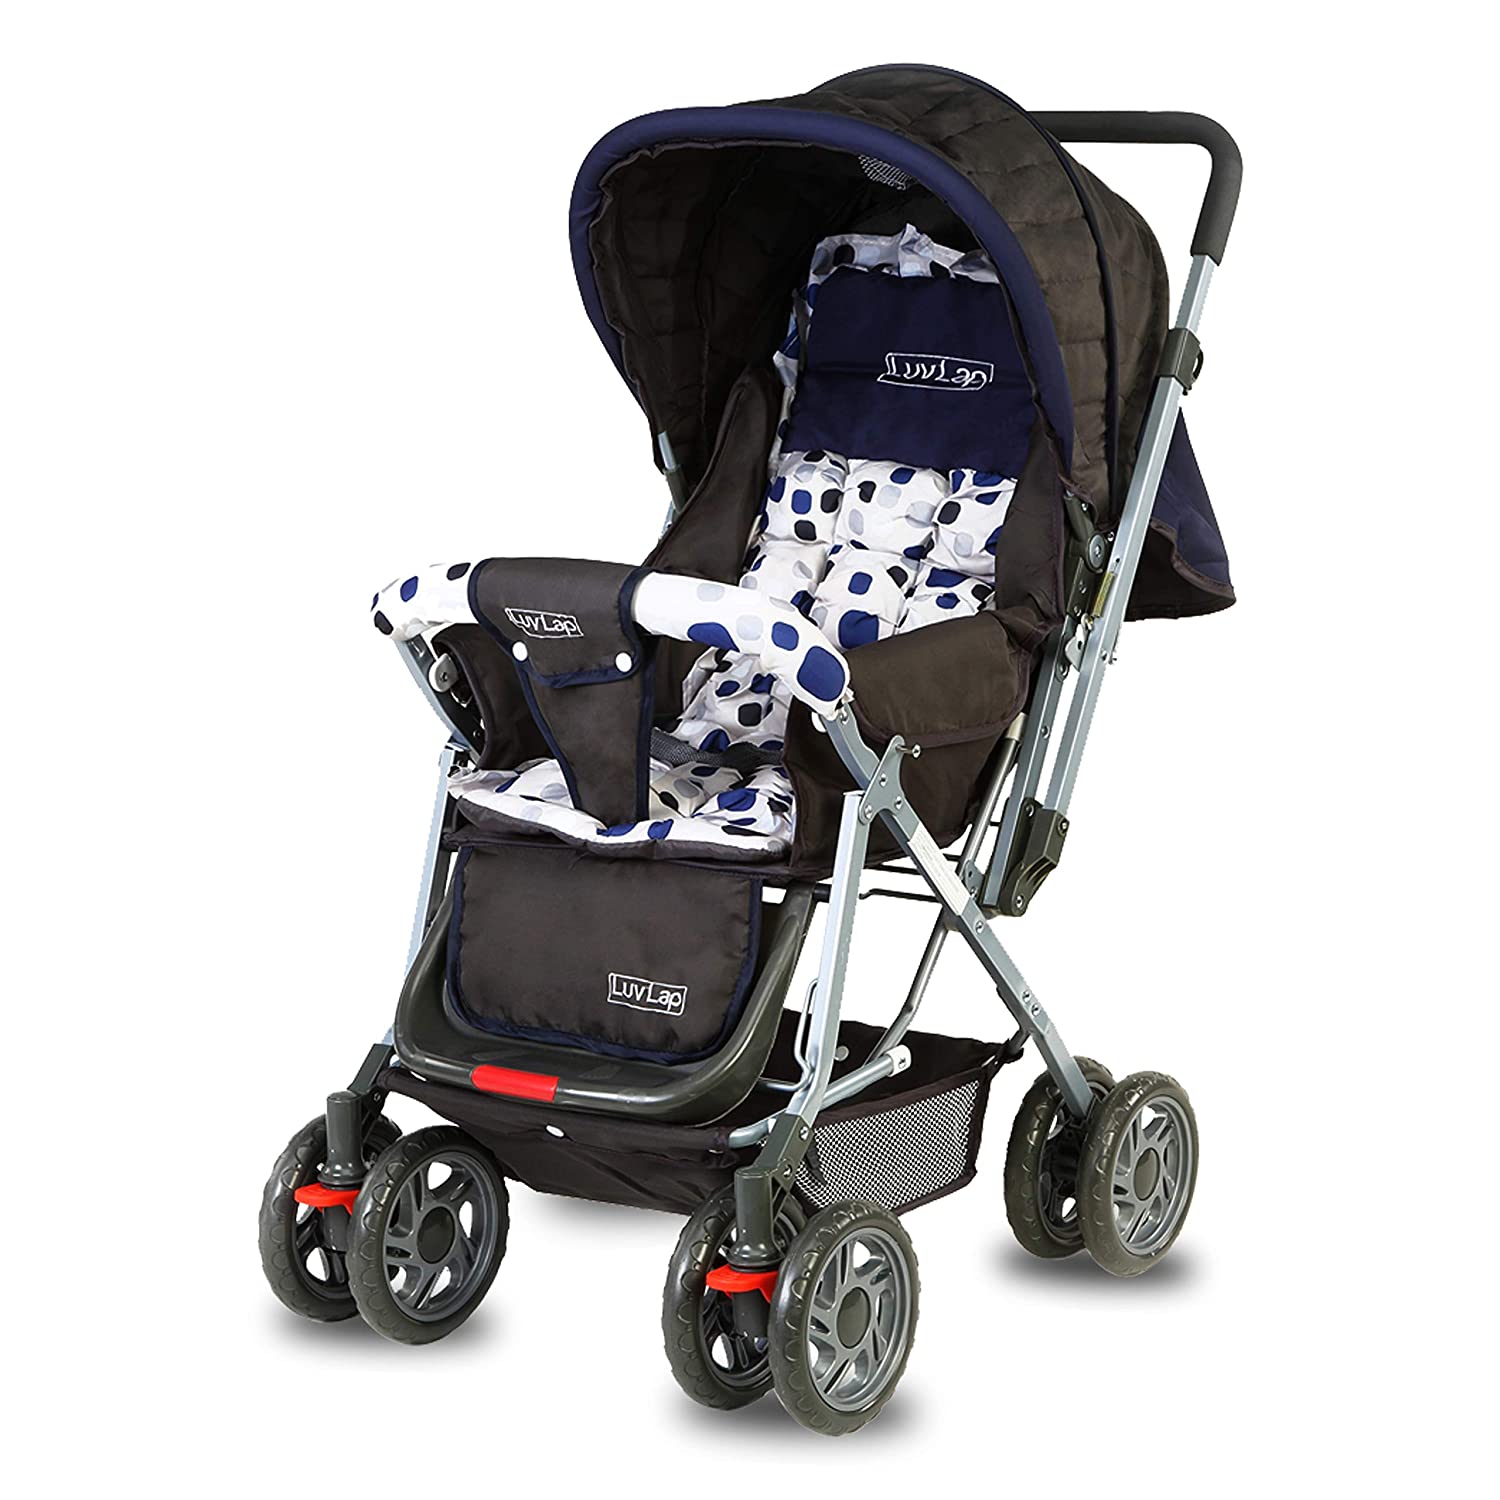 Top 4 Best baby Strollers in India 2020